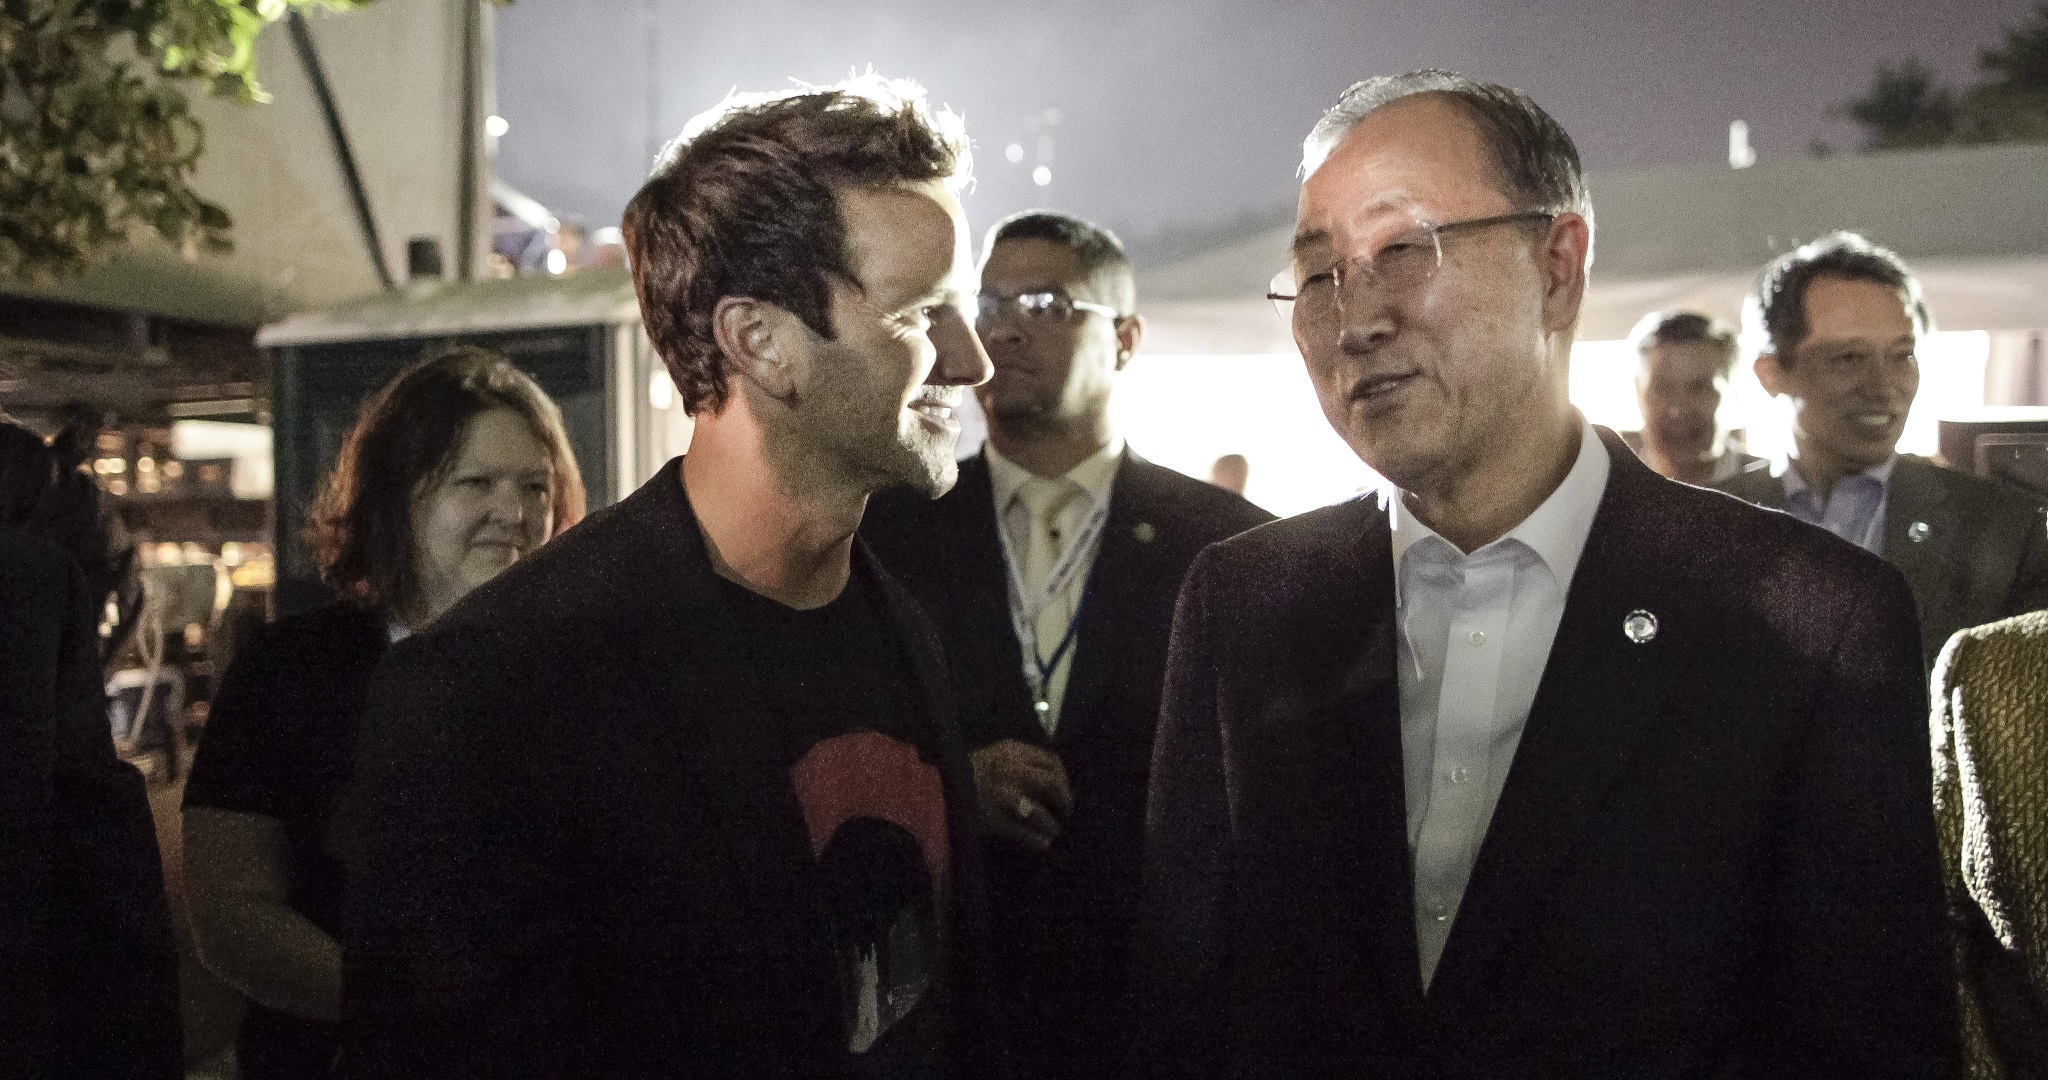 Former Illinois Rep. Aaron Schock with United Nations Secretary-General Ban Ki-moon at the Global Citizen Festival